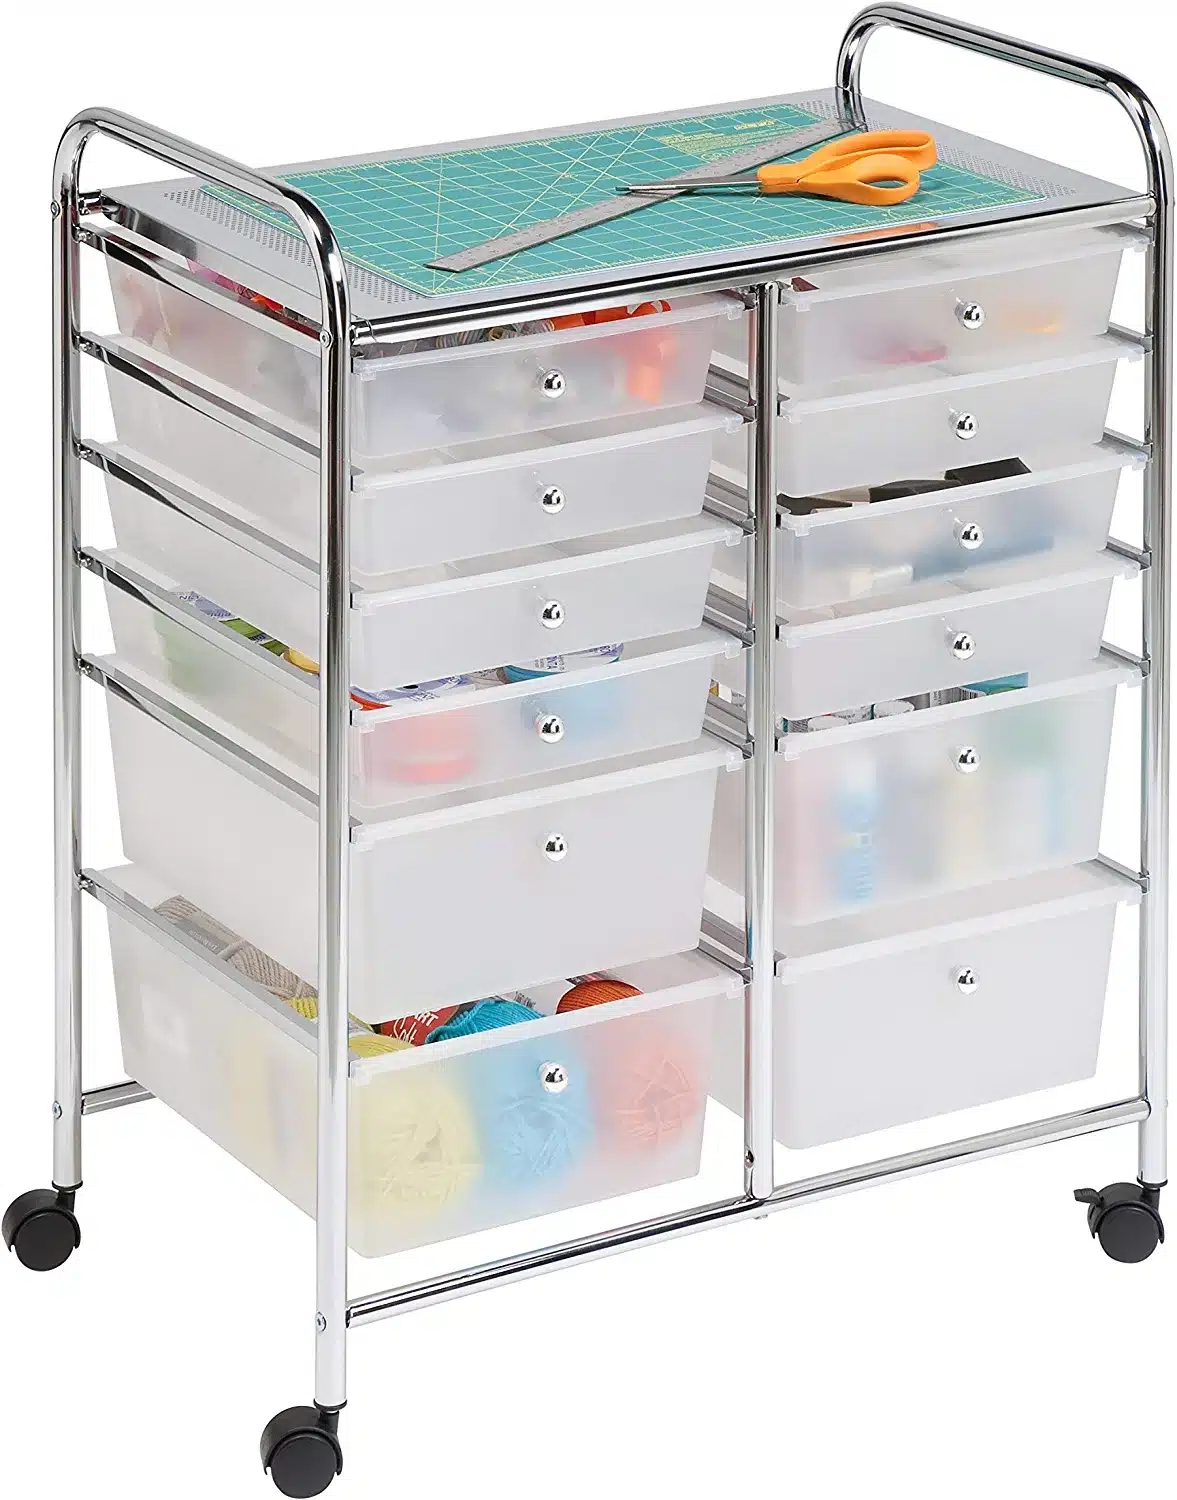 Honey-Can-Do Rolling Storage Cart and Organizer